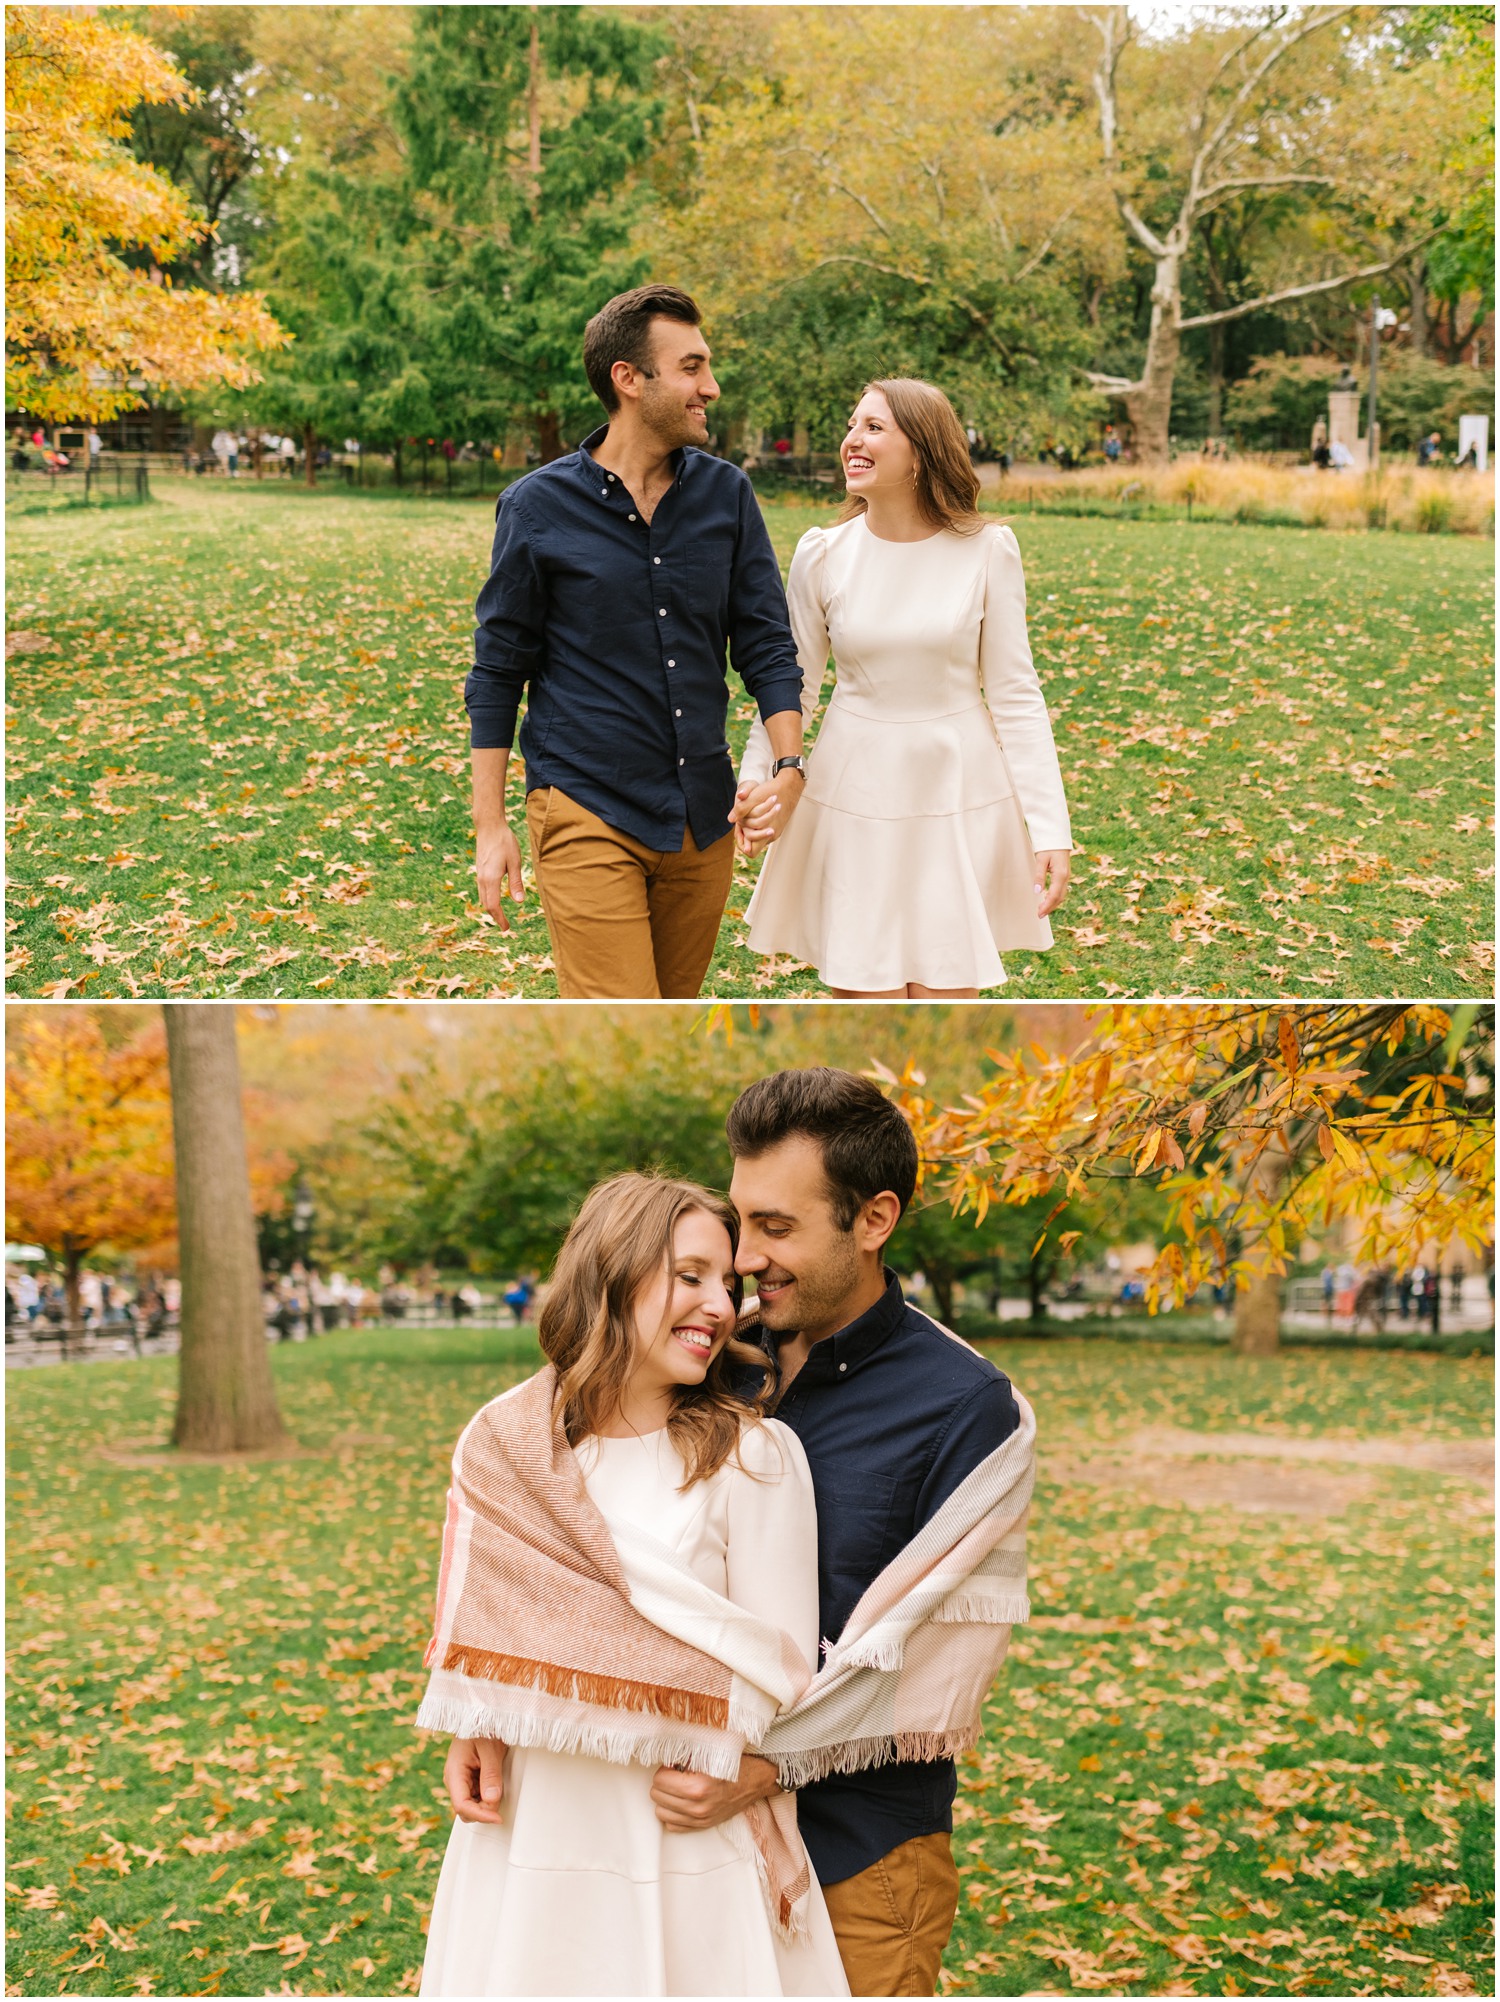 New York City engagement session with blanket and fall leaves